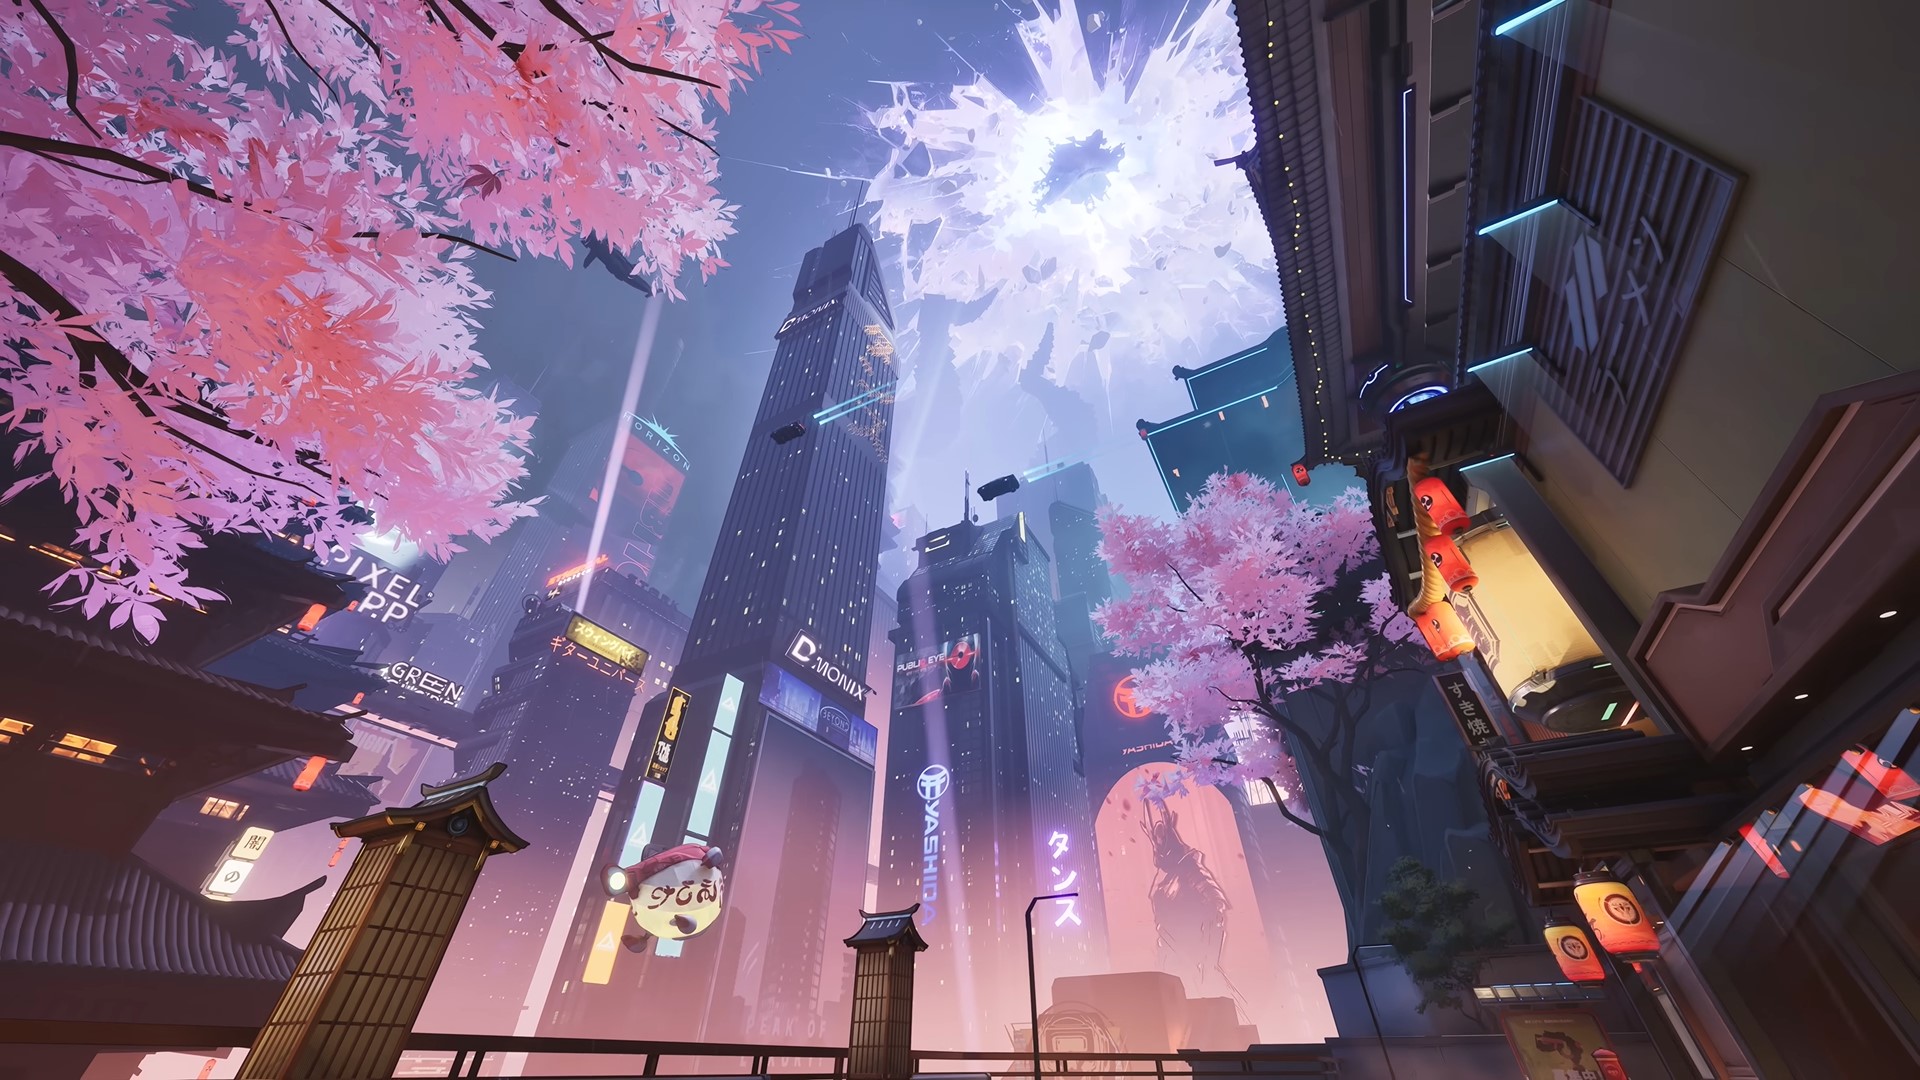 Marvel Rivals developers released a trailer for the Tokyo 2099 map